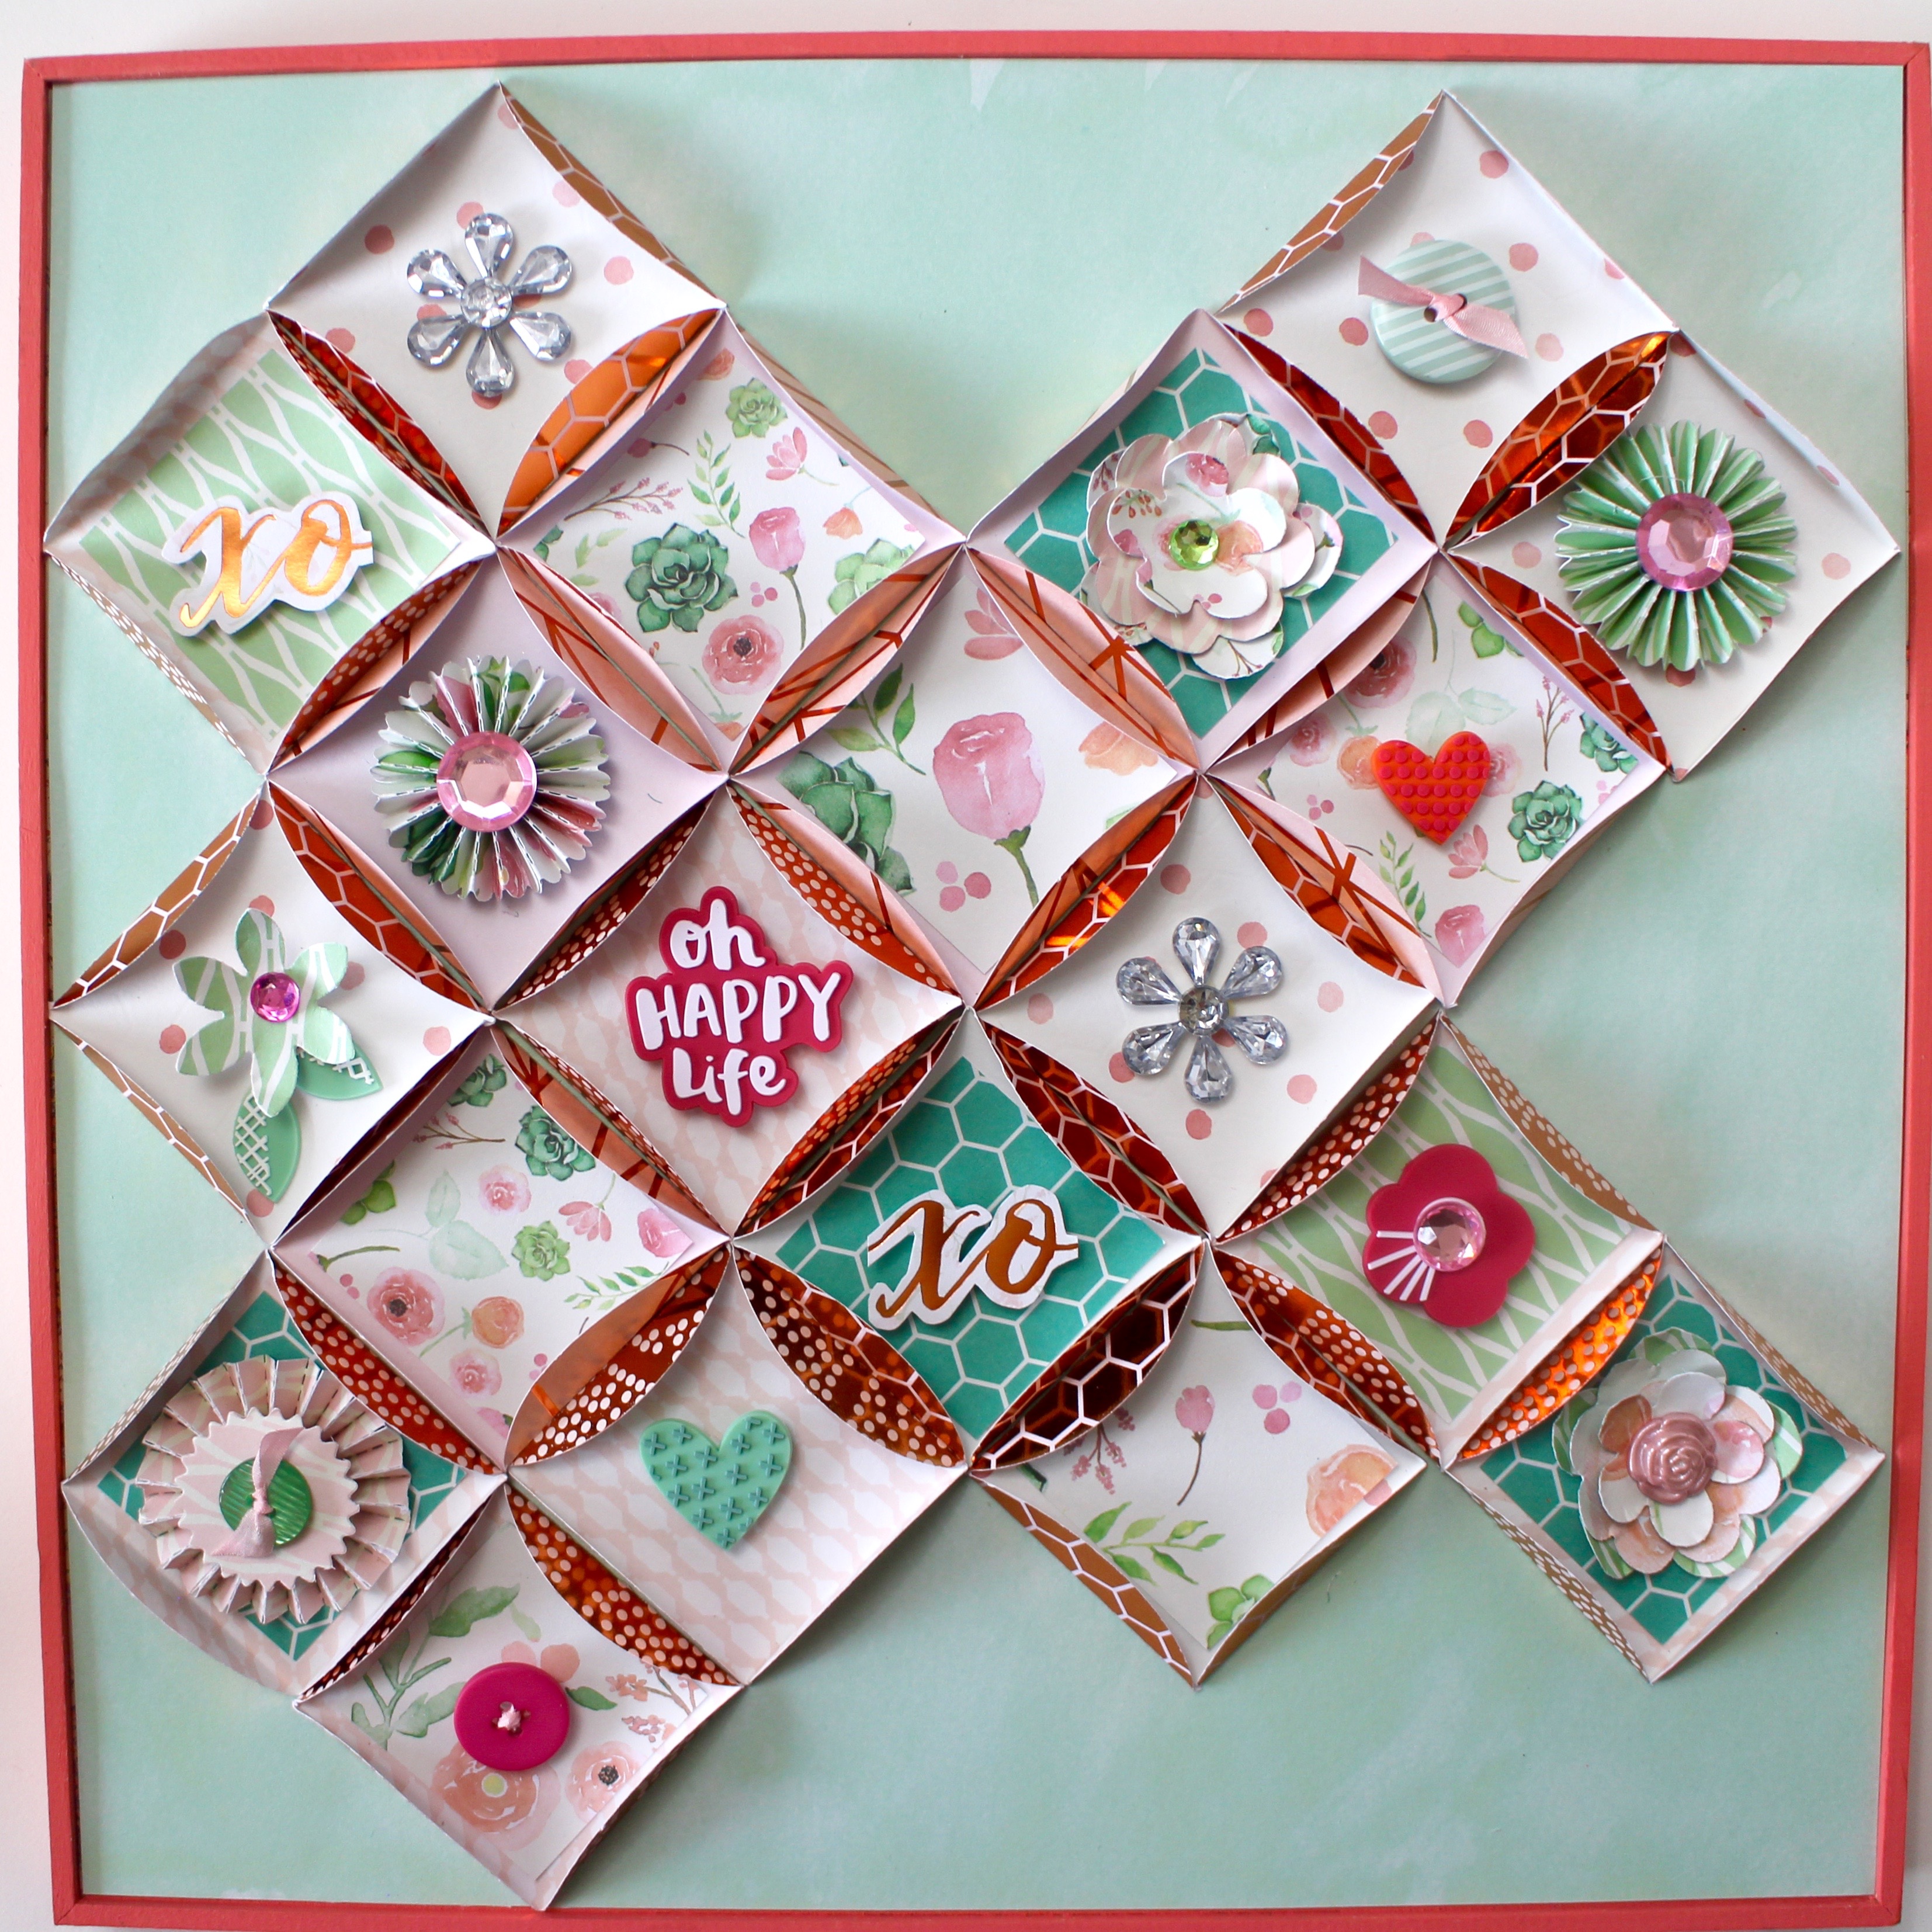 Create beautiful scrapbook wall art with your stash